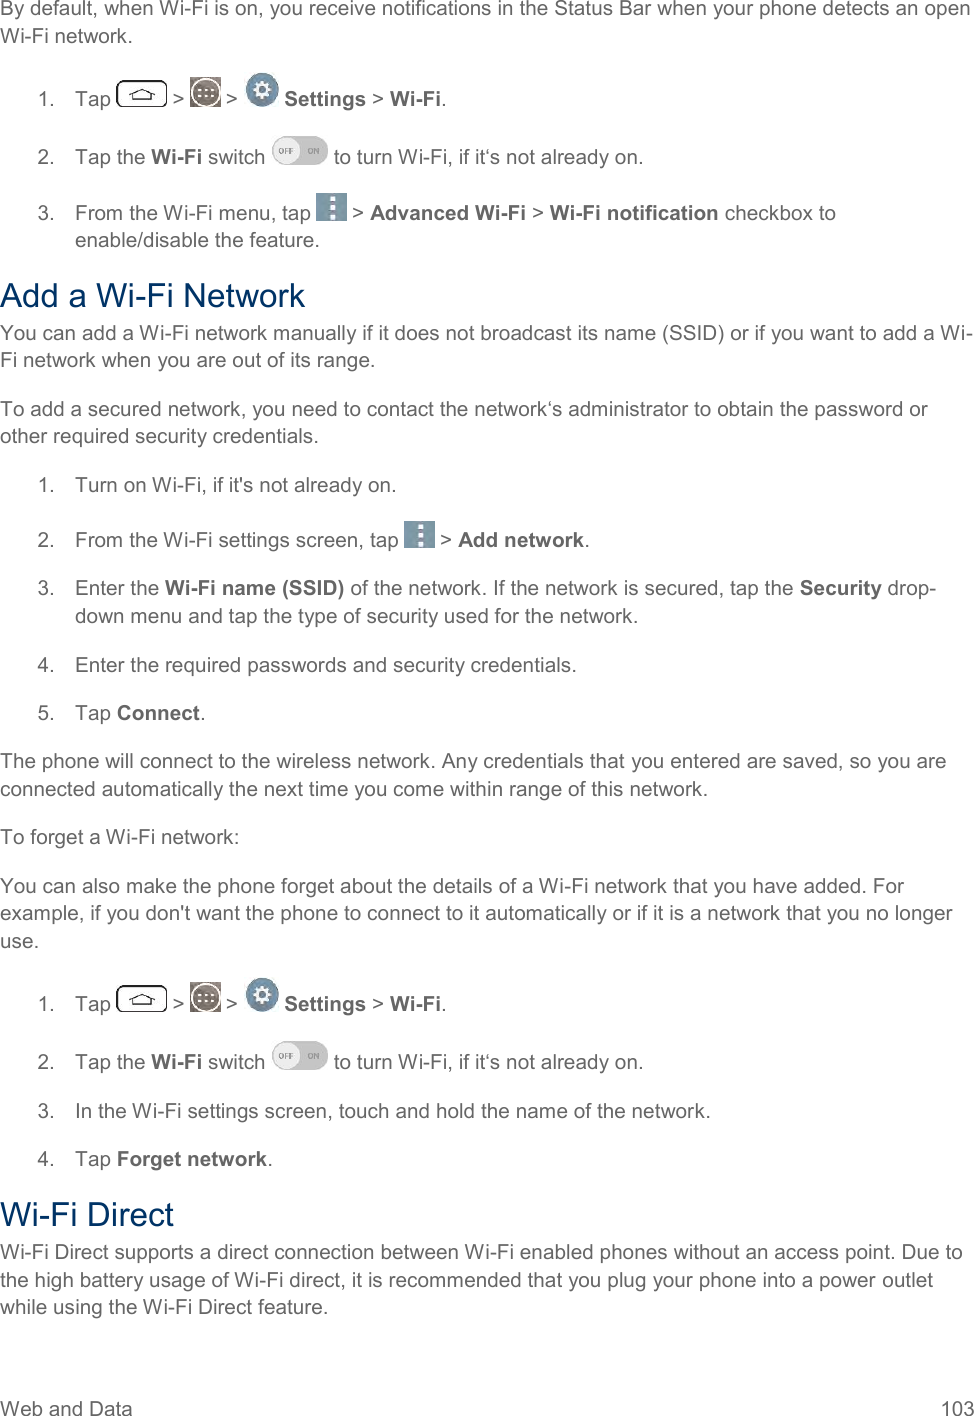 Web and Data  103 By default, when Wi-Fi is on, you receive notifications in the Status Bar when your phone detects an open Wi-Fi network. 1.  Tap   &gt;   &gt;   Settings &gt; Wi-Fi. 2.  Tap the Wi-Fi switch   to turn Wi-Fi, if it‘s not already on.  3.  From the Wi-Fi menu, tap   &gt; Advanced Wi-Fi &gt; Wi-Fi notification checkbox to enable/disable the feature.  Add a Wi-Fi Network You can add a Wi-Fi network manually if it does not broadcast its name (SSID) or if you want to add a Wi-Fi network when you are out of its range. To add a secured network, you need to contact the network‘s administrator to obtain the password or other required security credentials. 1.  Turn on Wi-Fi, if it&apos;s not already on. 2.  From the Wi-Fi settings screen, tap   &gt; Add network. 3.  Enter the Wi-Fi name (SSID) of the network. If the network is secured, tap the Security drop-down menu and tap the type of security used for the network. 4.  Enter the required passwords and security credentials. 5.  Tap Connect. The phone will connect to the wireless network. Any credentials that you entered are saved, so you are connected automatically the next time you come within range of this network. To forget a Wi-Fi network: You can also make the phone forget about the details of a Wi-Fi network that you have added. For example, if you don&apos;t want the phone to connect to it automatically or if it is a network that you no longer use. 1.  Tap   &gt;   &gt;   Settings &gt; Wi-Fi. 2.  Tap the Wi-Fi switch   to turn Wi-Fi, if it‘s not already on.  3.  In the Wi-Fi settings screen, touch and hold the name of the network. 4.  Tap Forget network. Wi-Fi Direct Wi-Fi Direct supports a direct connection between Wi-Fi enabled phones without an access point. Due to the high battery usage of Wi-Fi direct, it is recommended that you plug your phone into a power outlet while using the Wi-Fi Direct feature. 